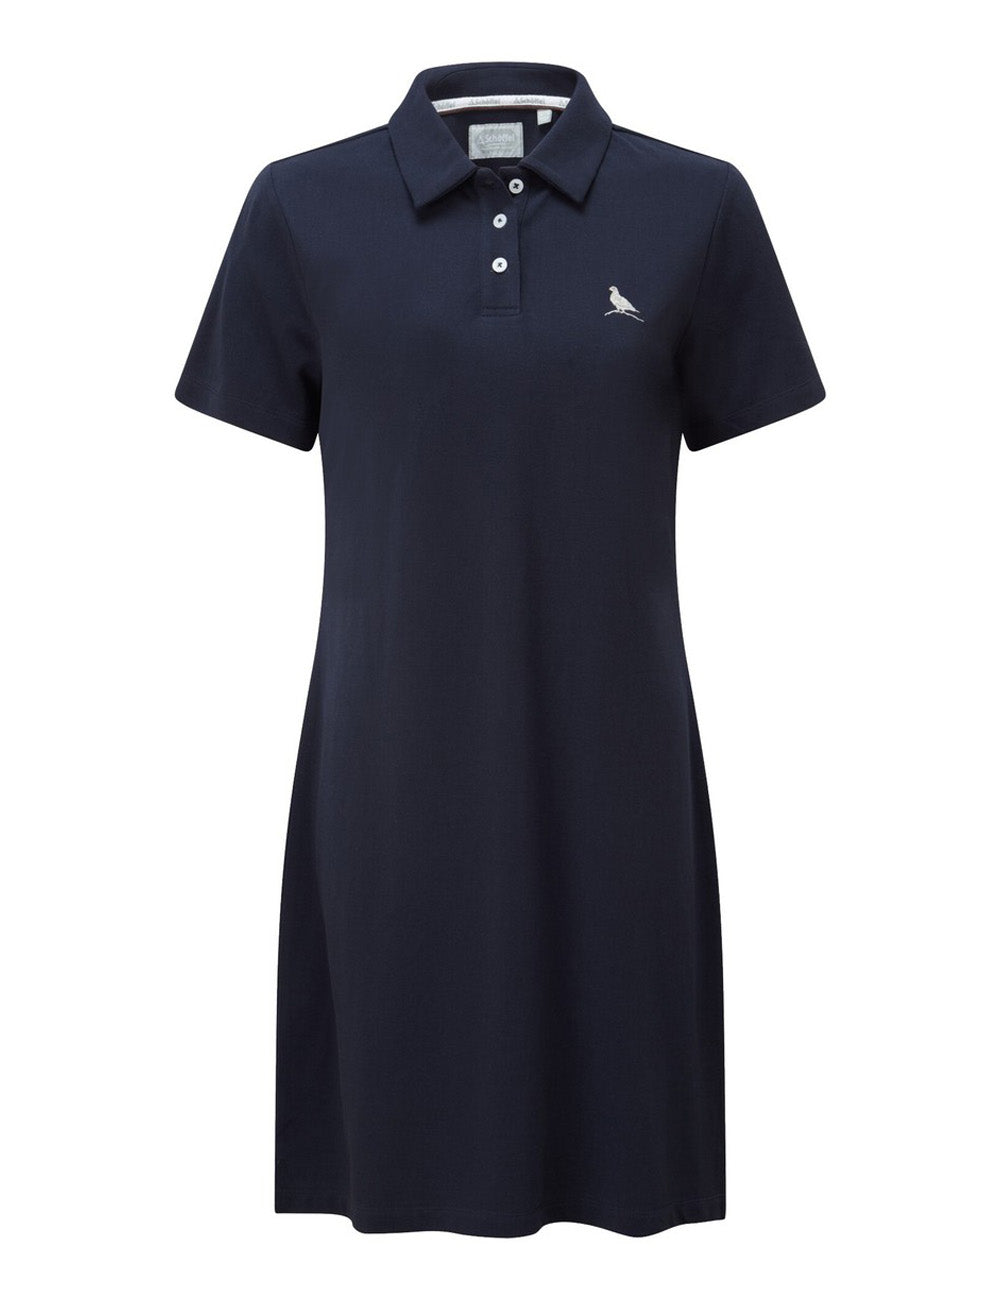 Schoffel's St. Ives Polo Dress in Navy on a grey background